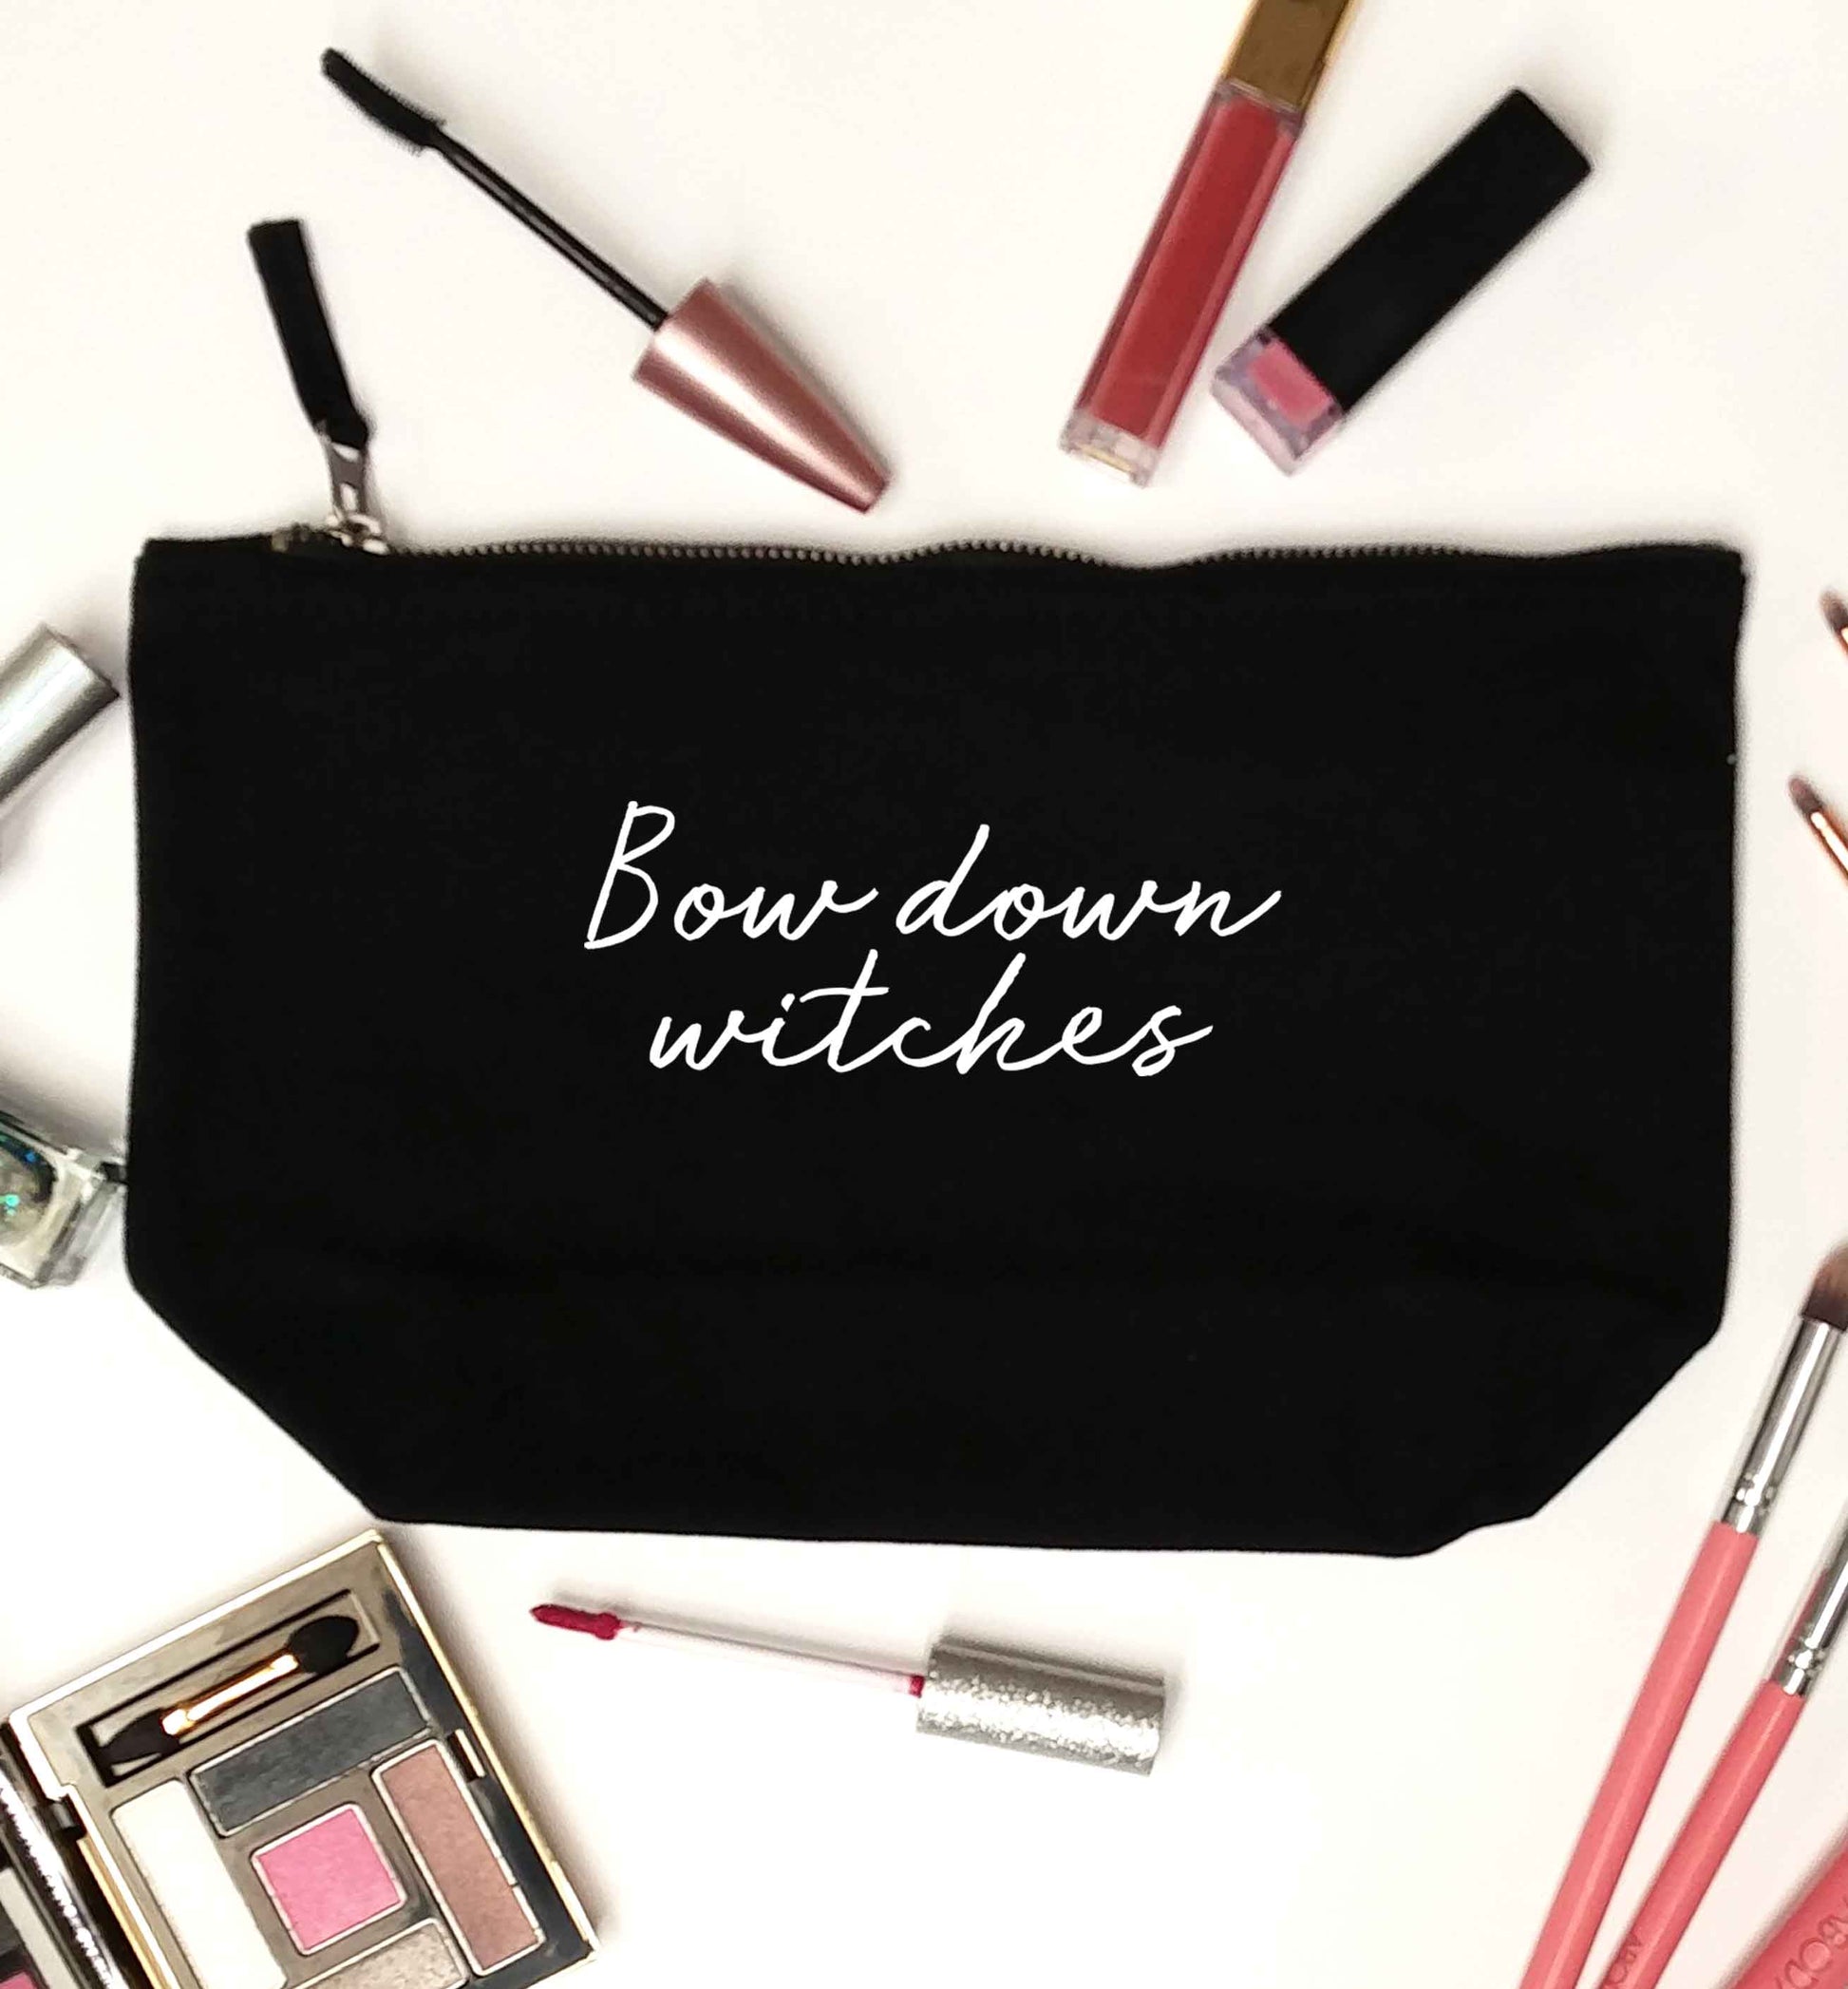 Bow down witches black makeup bag